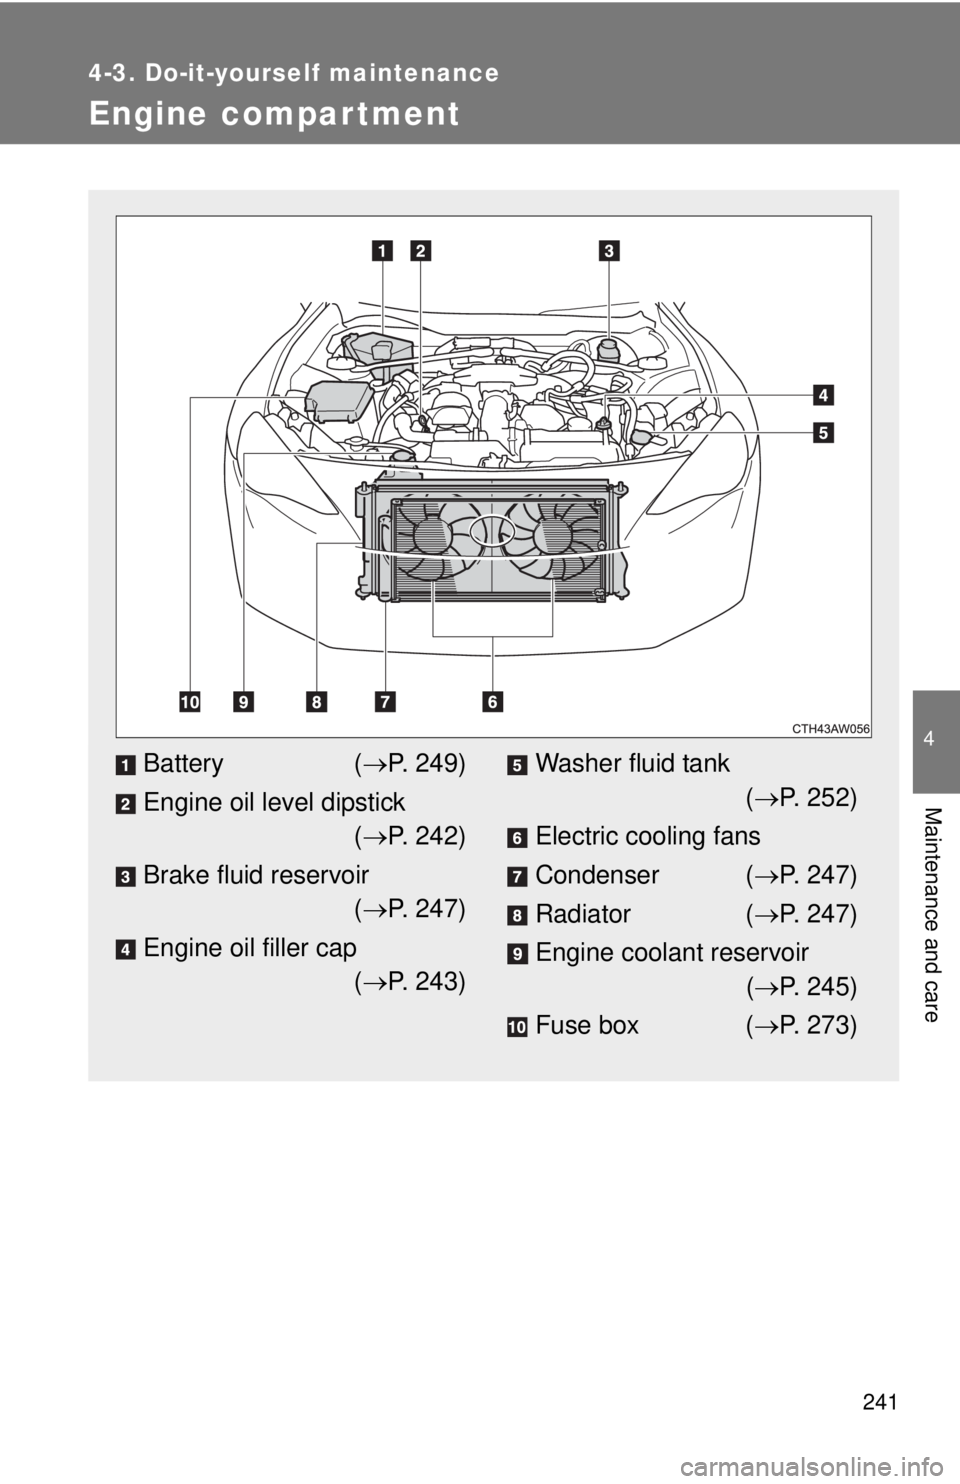 TOYOTA FR-S 2013  Owners Manual (in English) 241
4-3. Do-it-yourself maintenance
4
Maintenance and care
Engine compar tment
Battery( P. 249)
Engine oil level dipstick ( P. 242)
Brake fluid reservoir ( P. 247)
Engine oil filler cap ( 